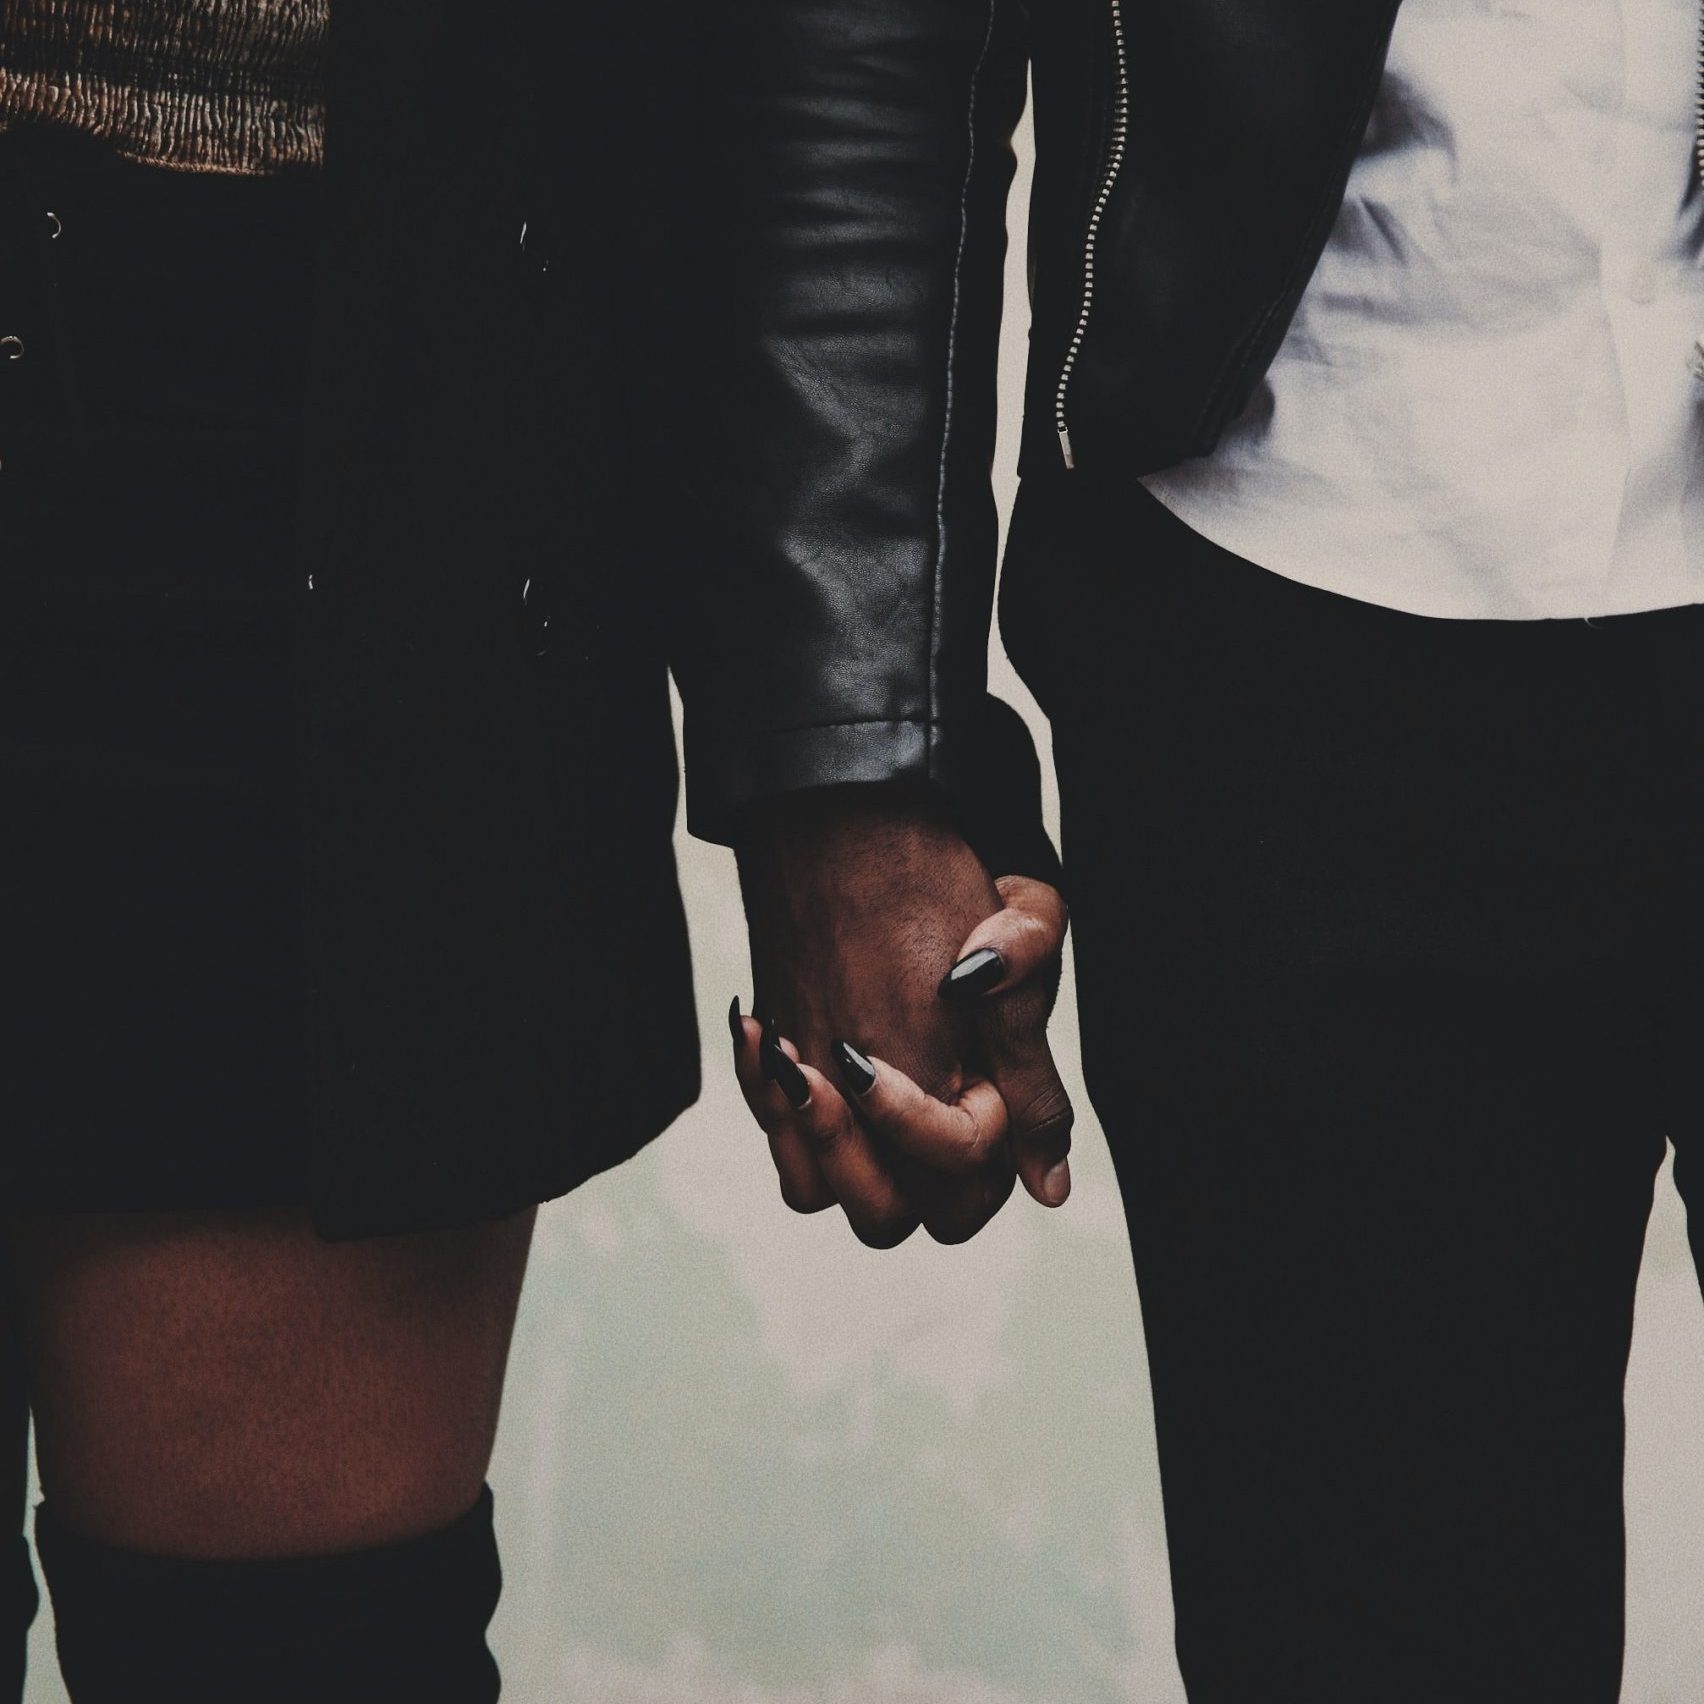 A close up photo of the torsos of two people are holding hands